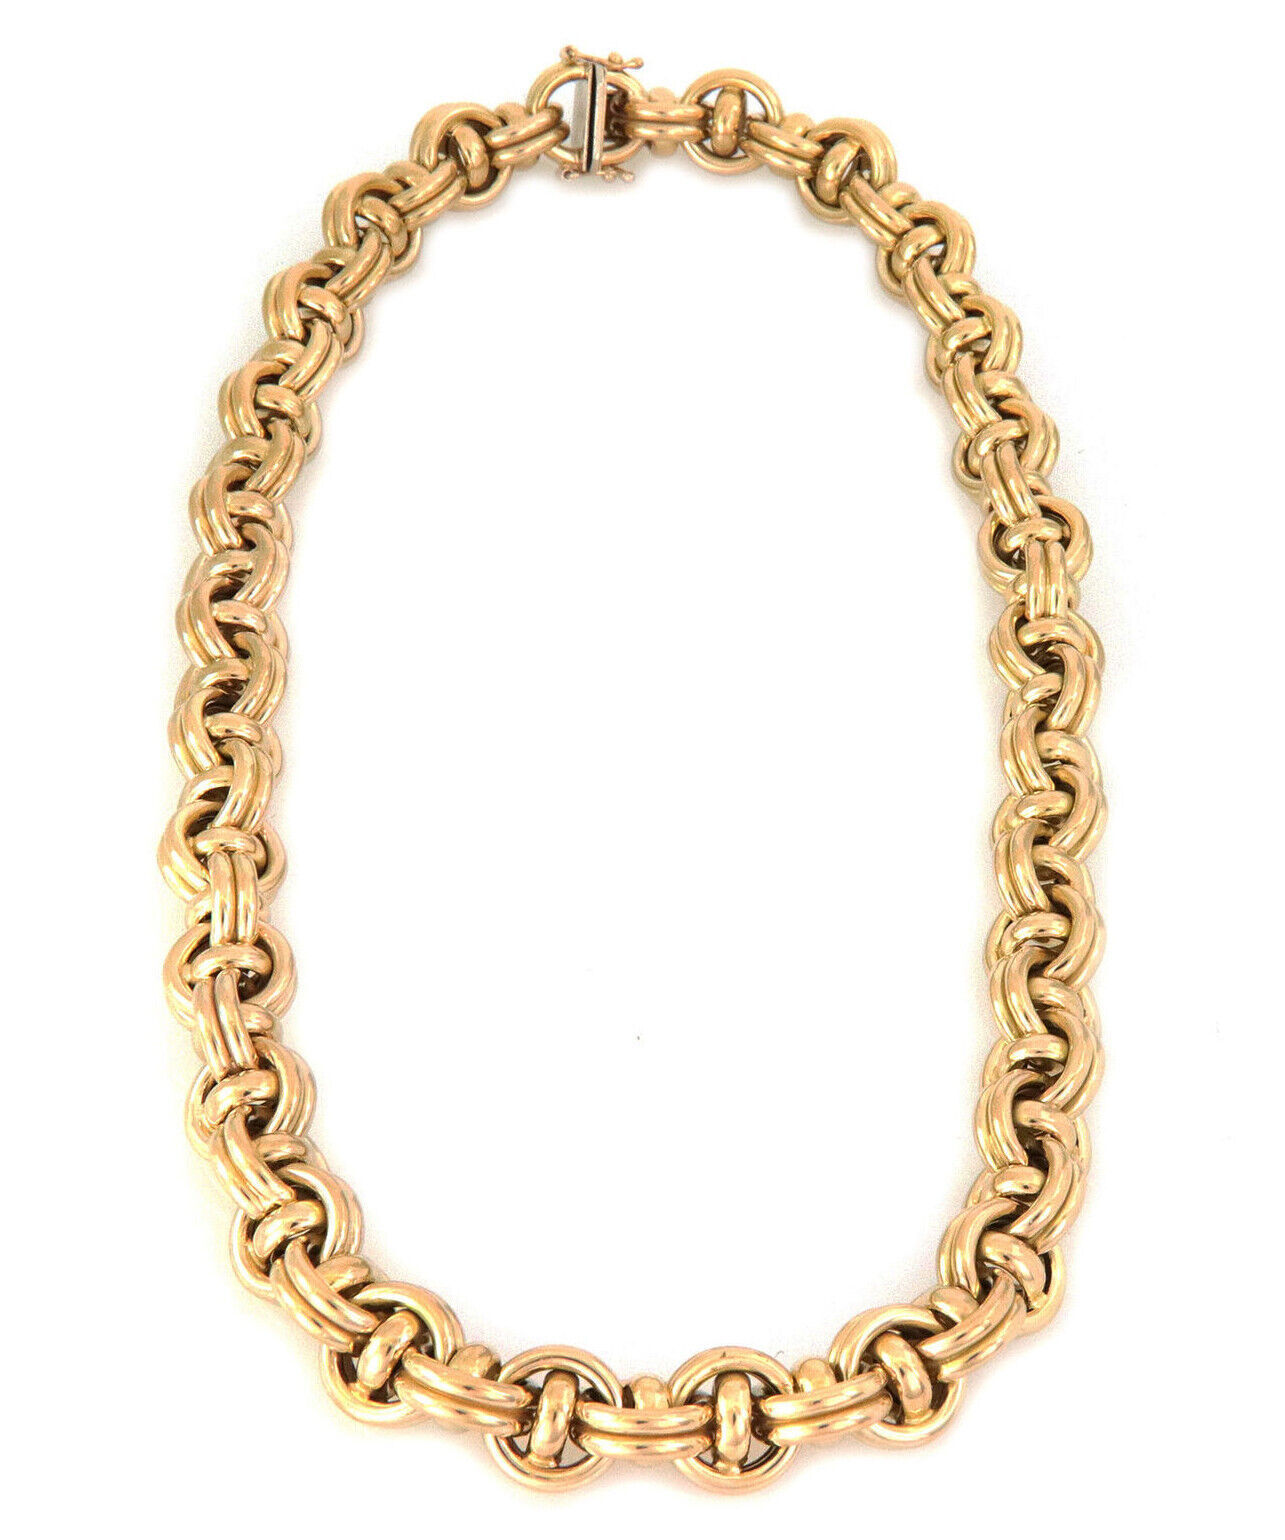 Fancy 12.5mm 14k Yellow Gold Round Link Necklace